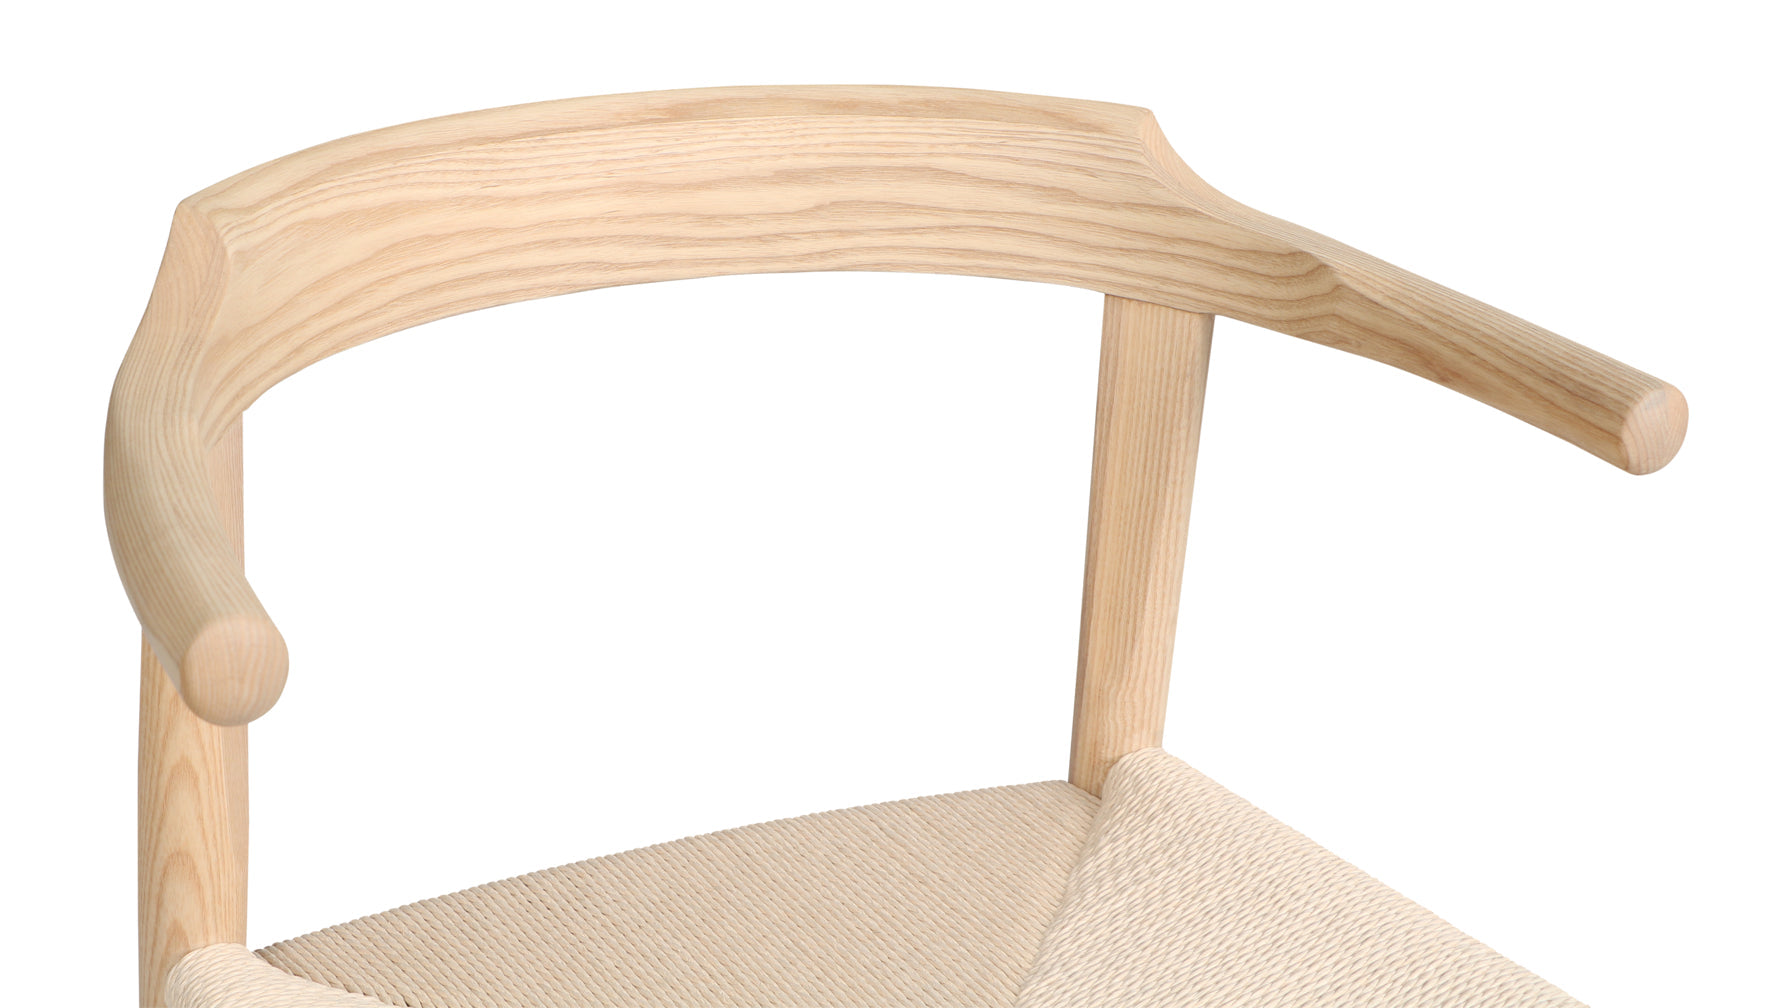 Tuck In Dining Chair, White Ash, Natural Papercord Seat - Image 8